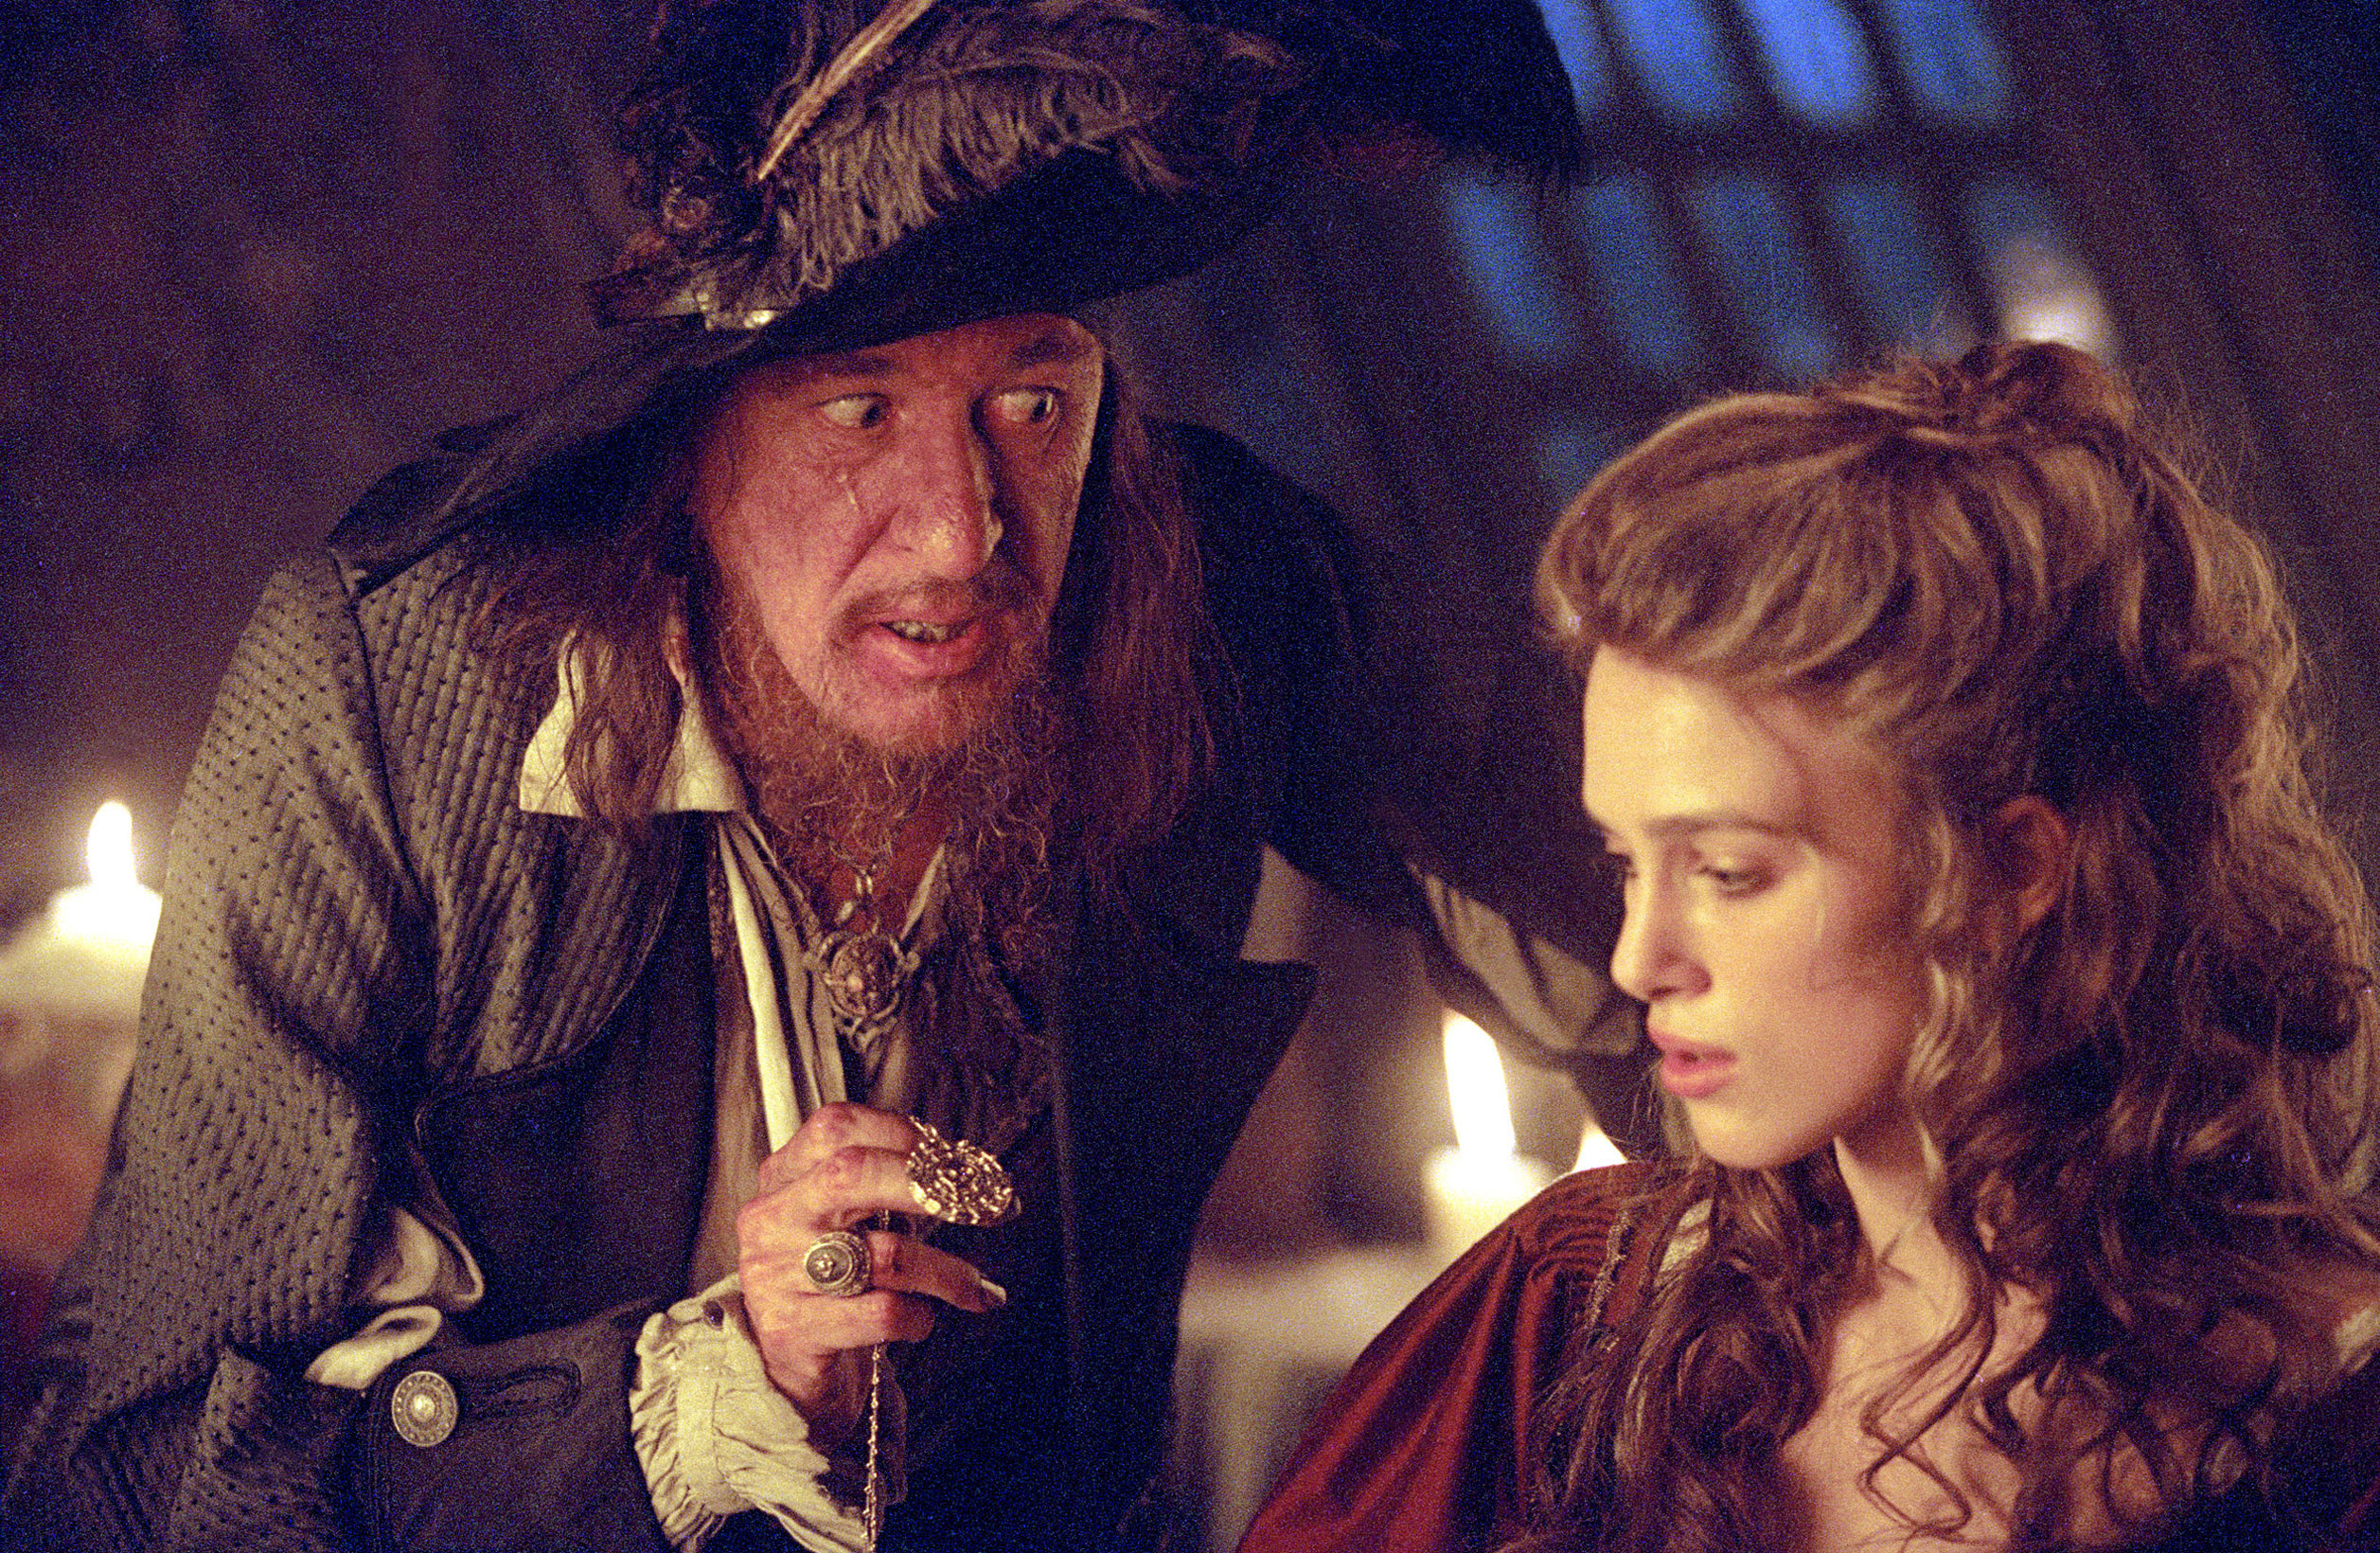 Geoffrey Rush talks to Keira Knightley in his pirate ship